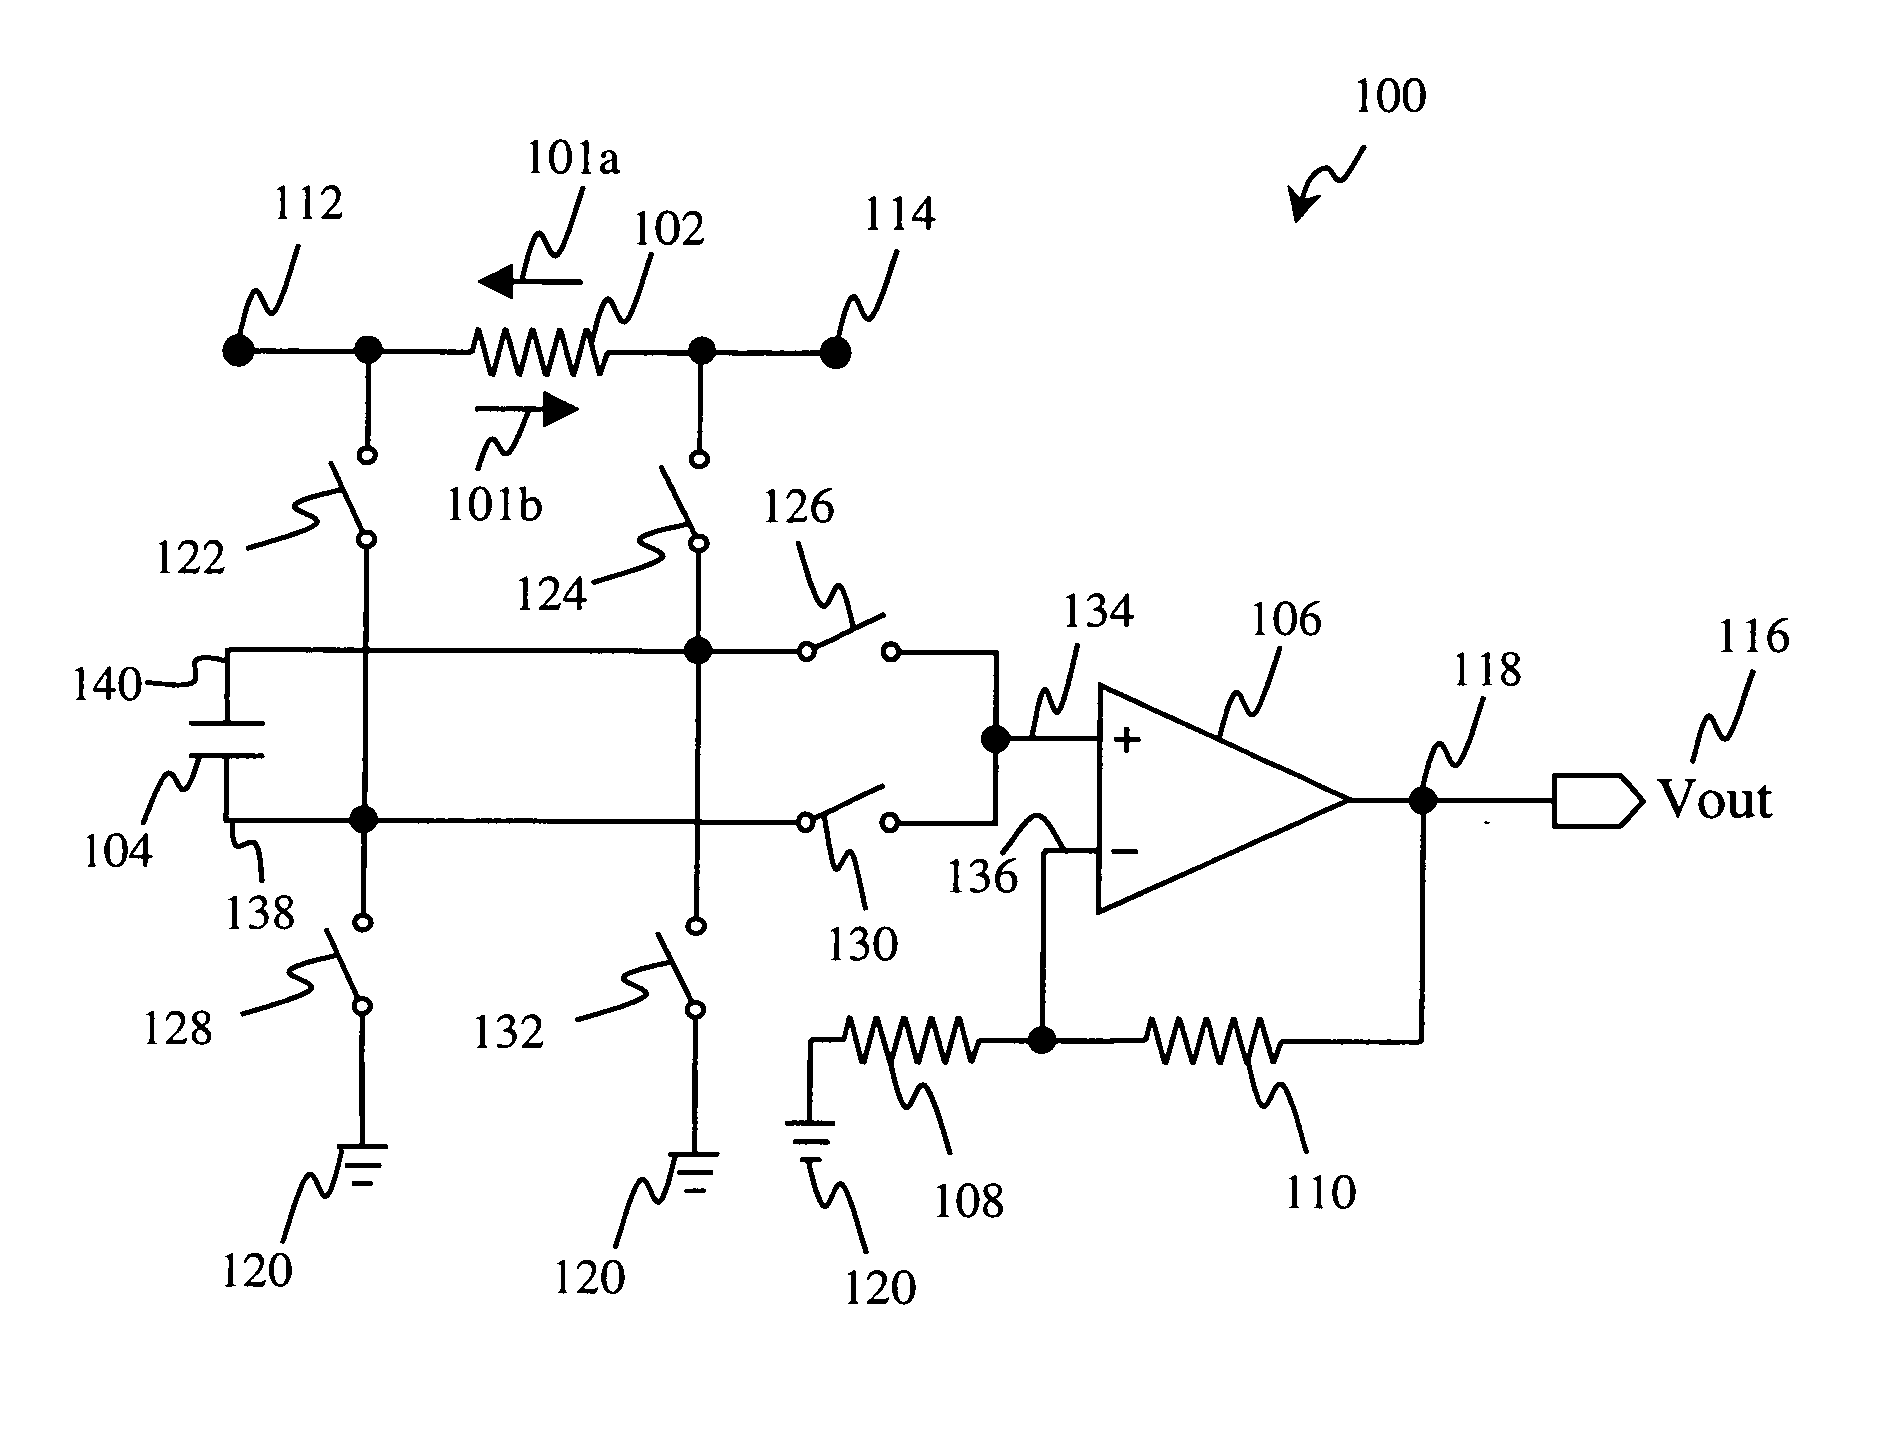 Accurate and efficient sensing circuit and method for bi-directional signals